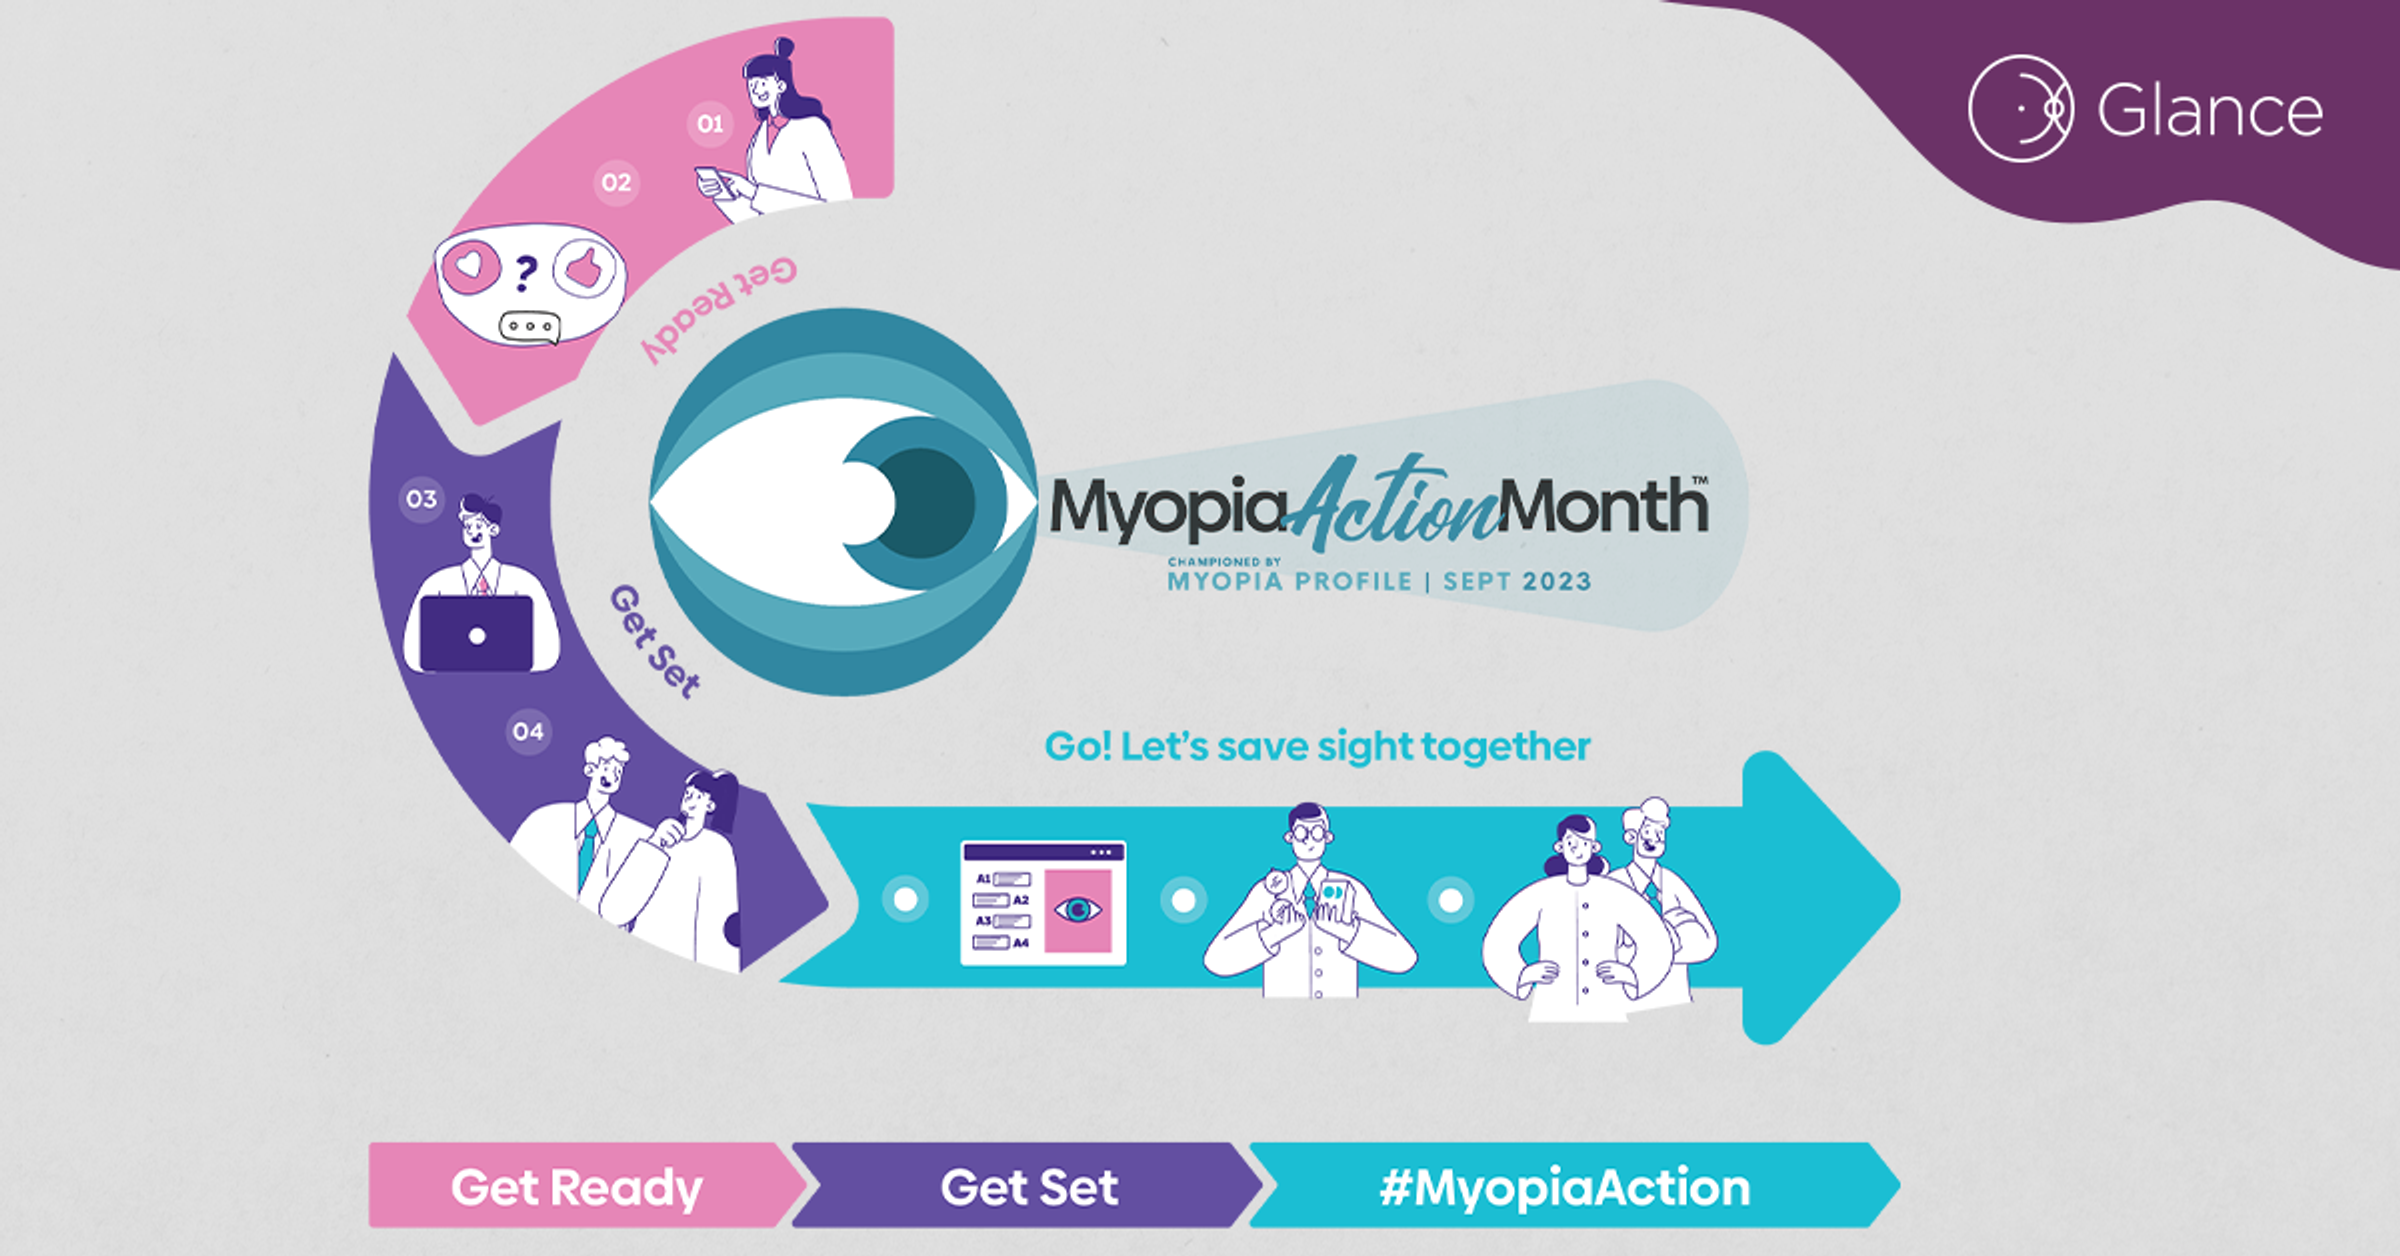 September marks global launch of Myopia Action Month